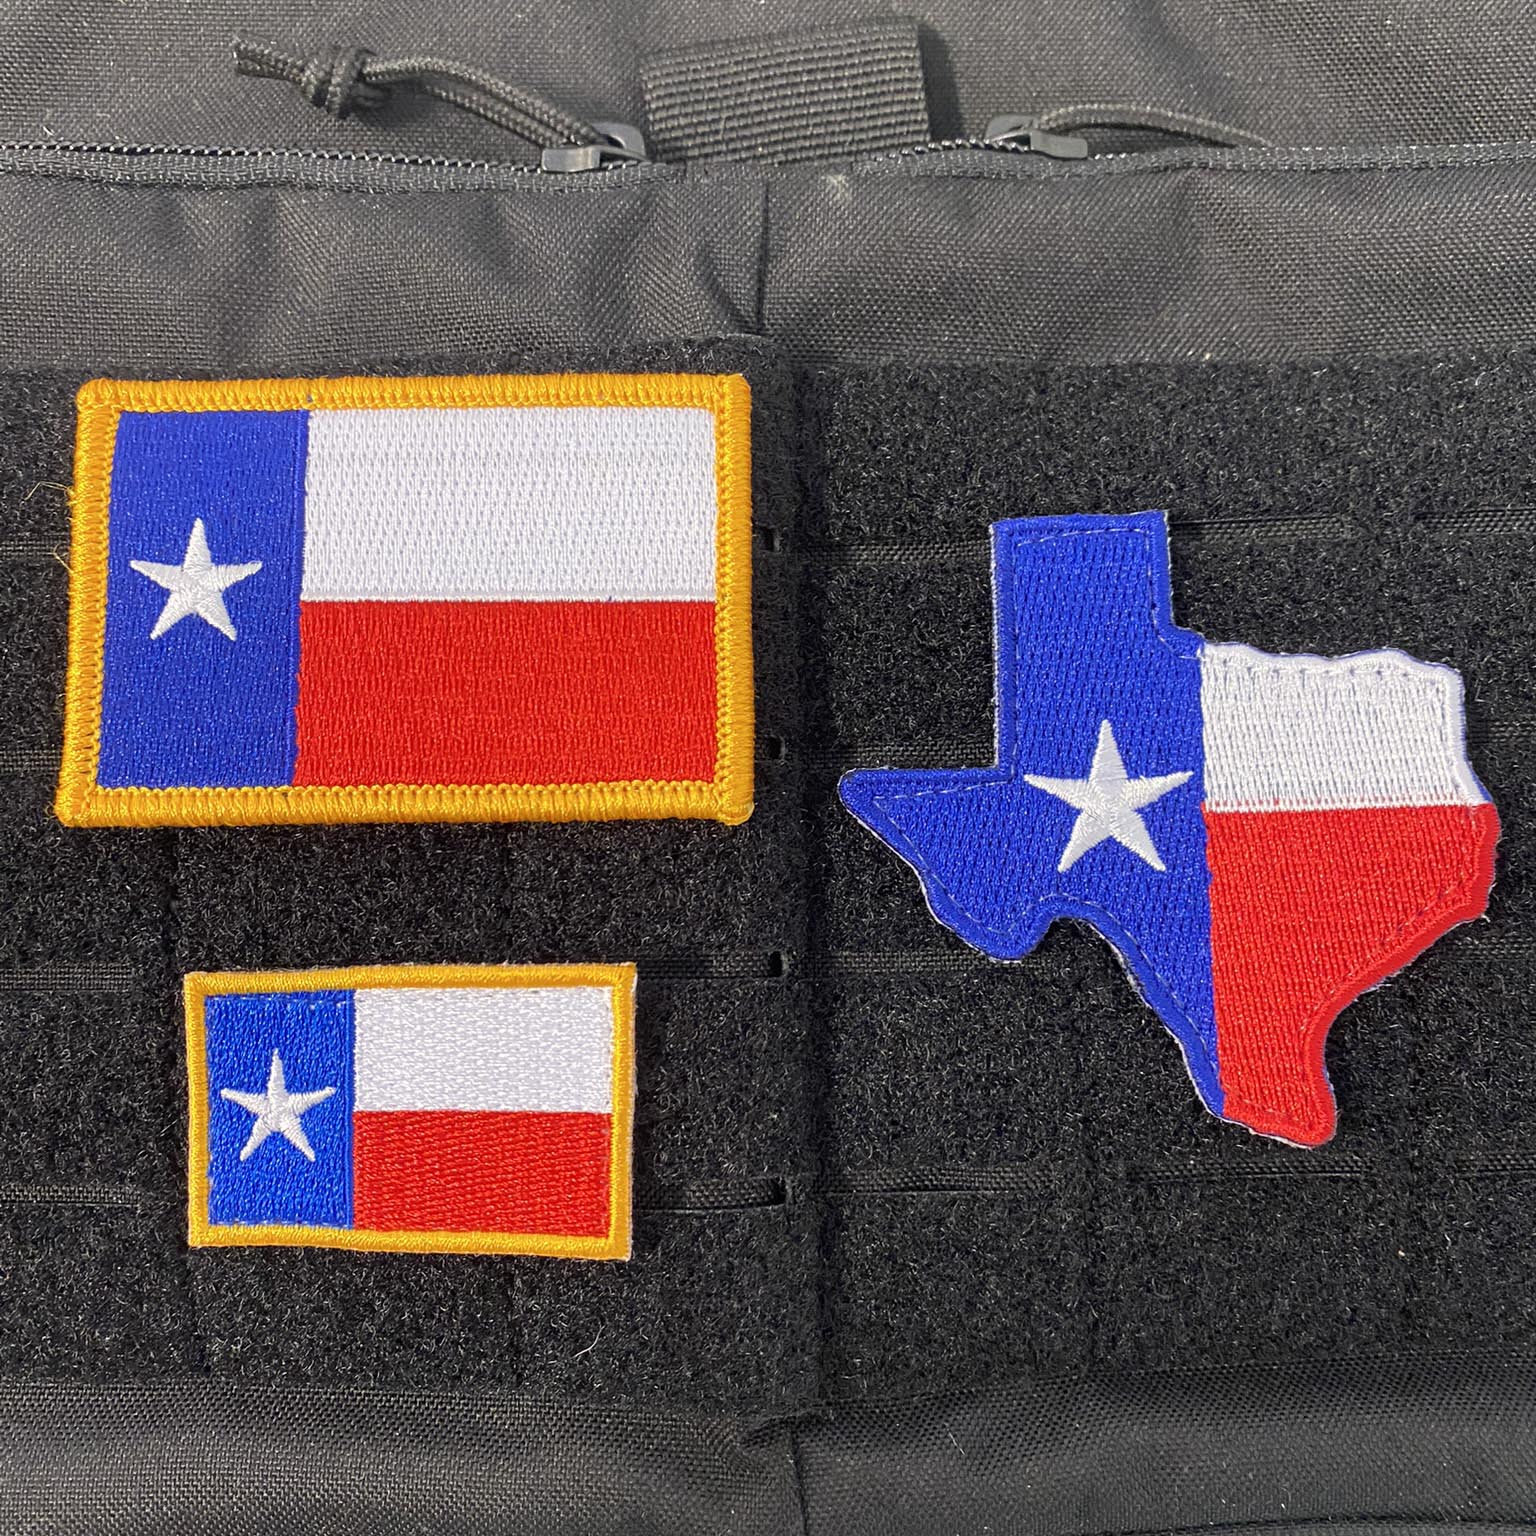 TEXAS Flag Tactical Patches - Set Of 3